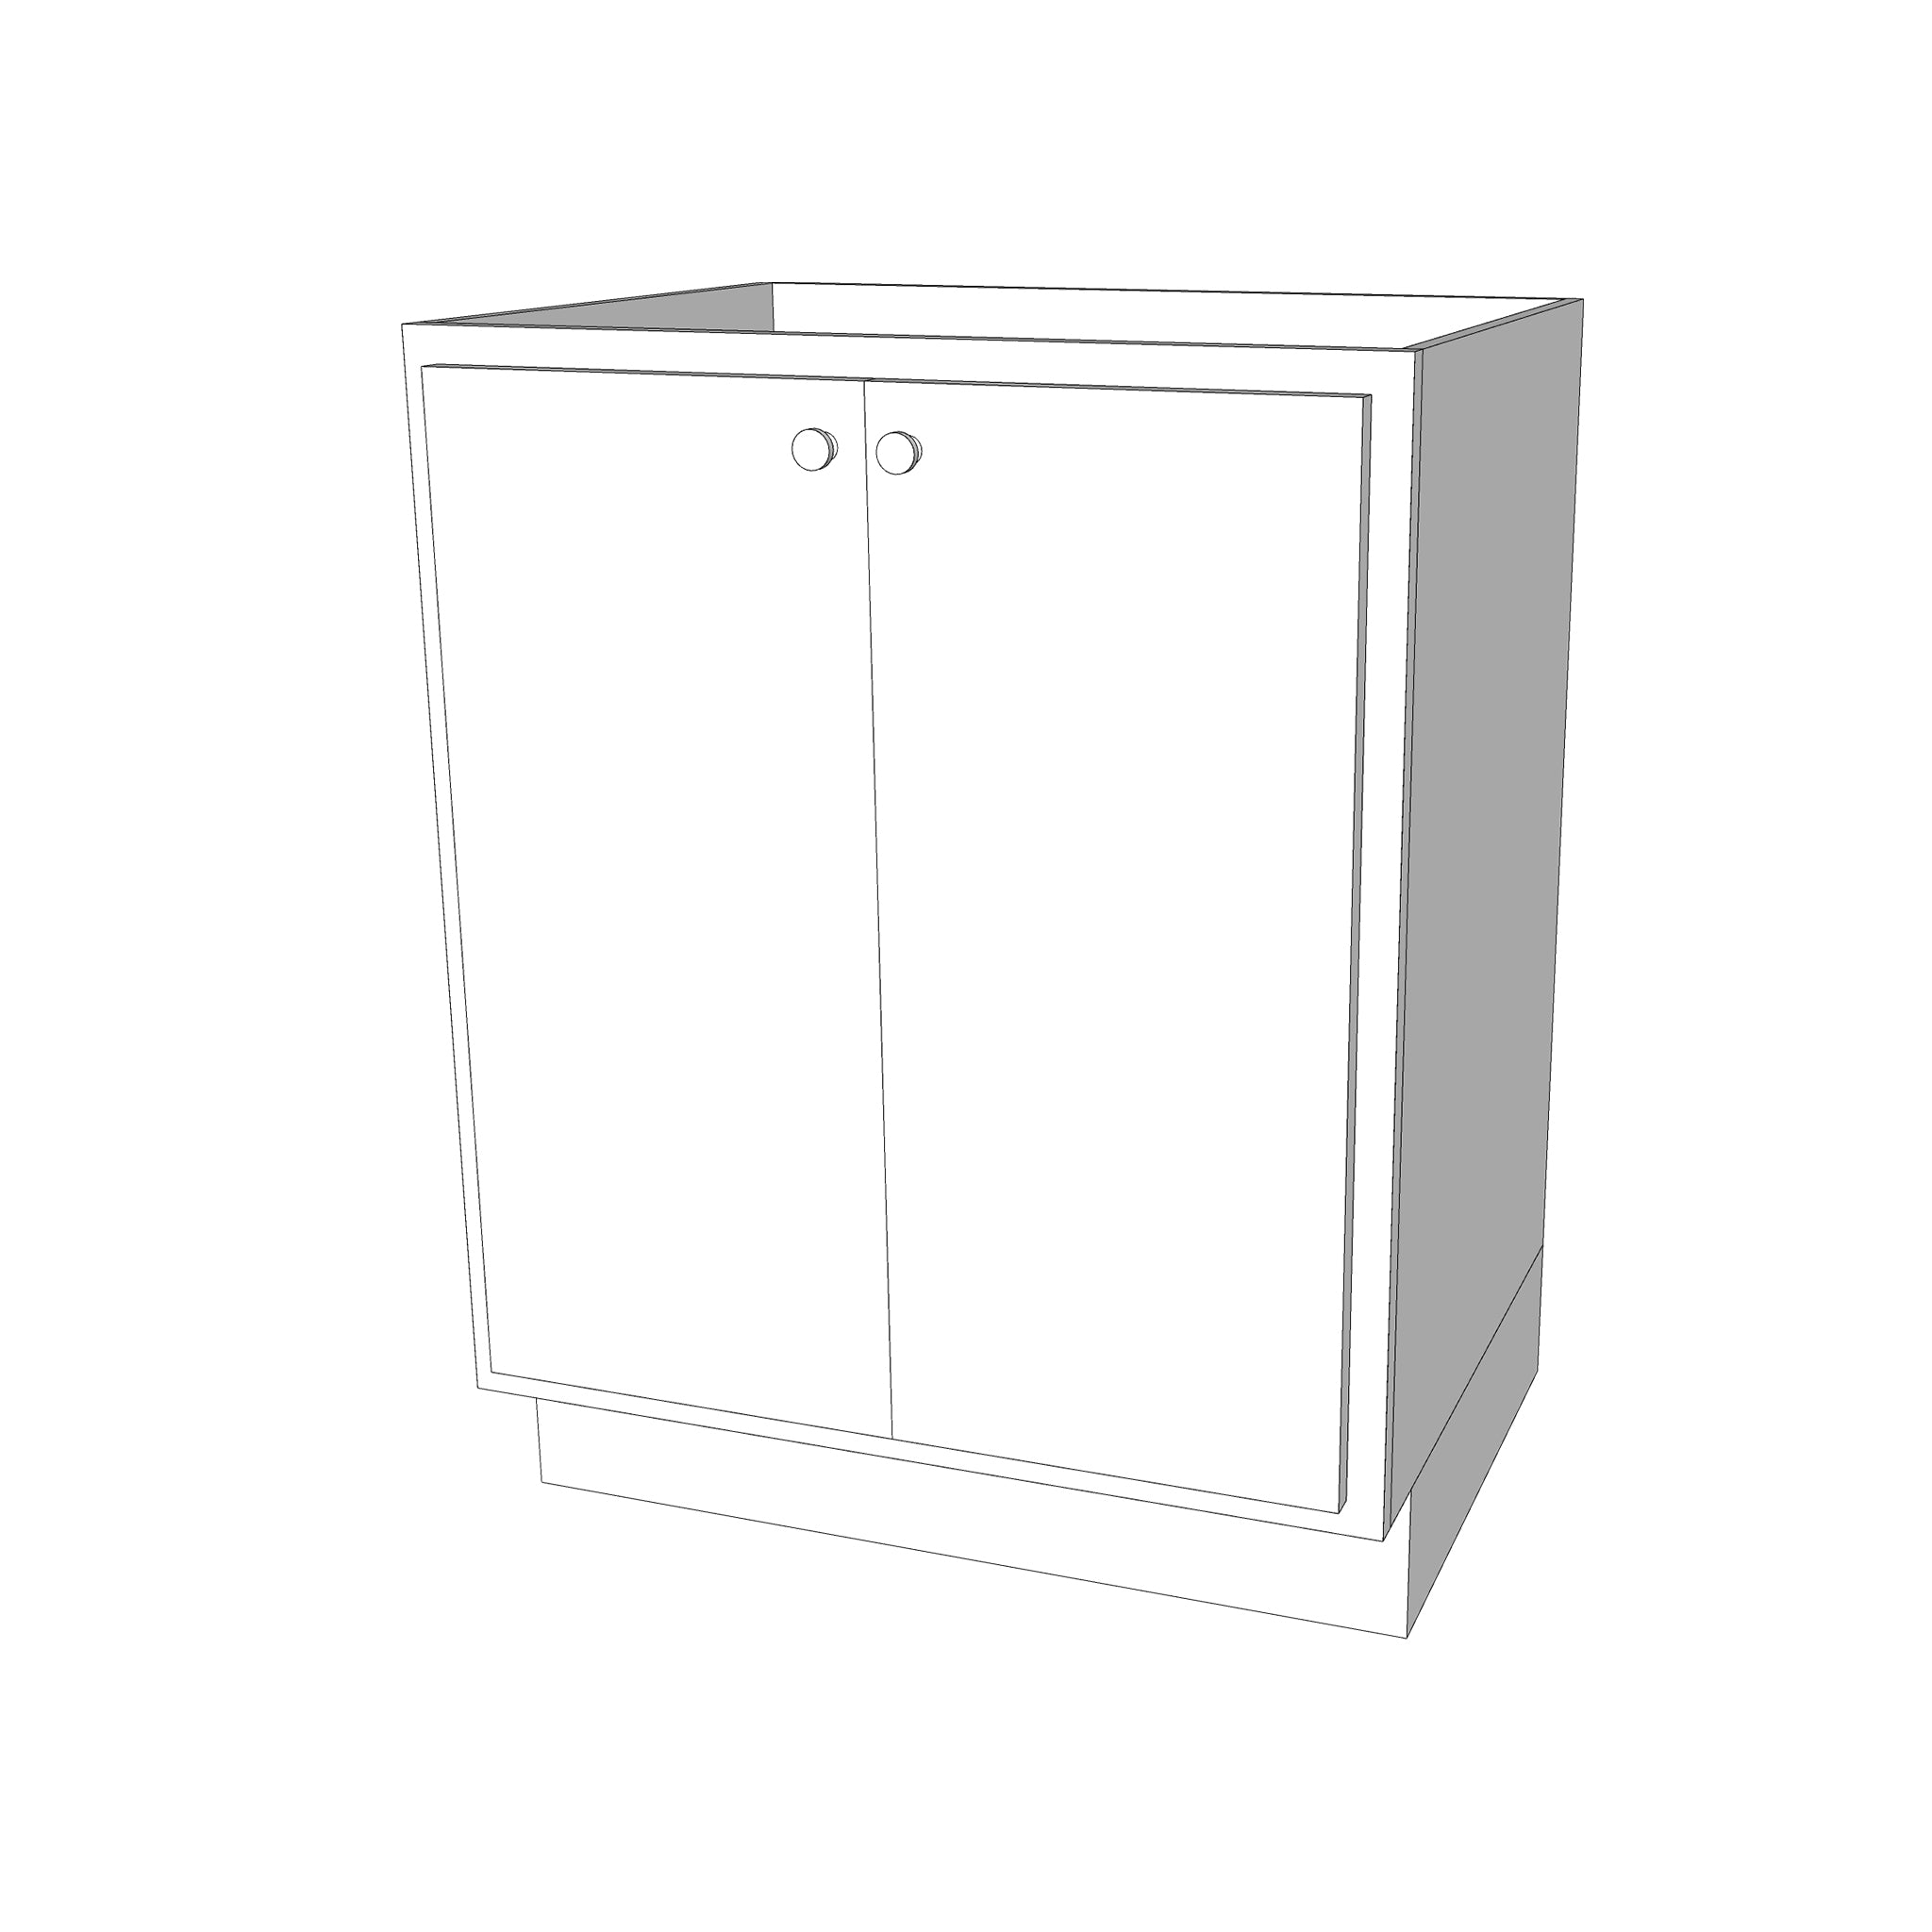 24x34 Full Height Vanity Base Cabinet - Assembled